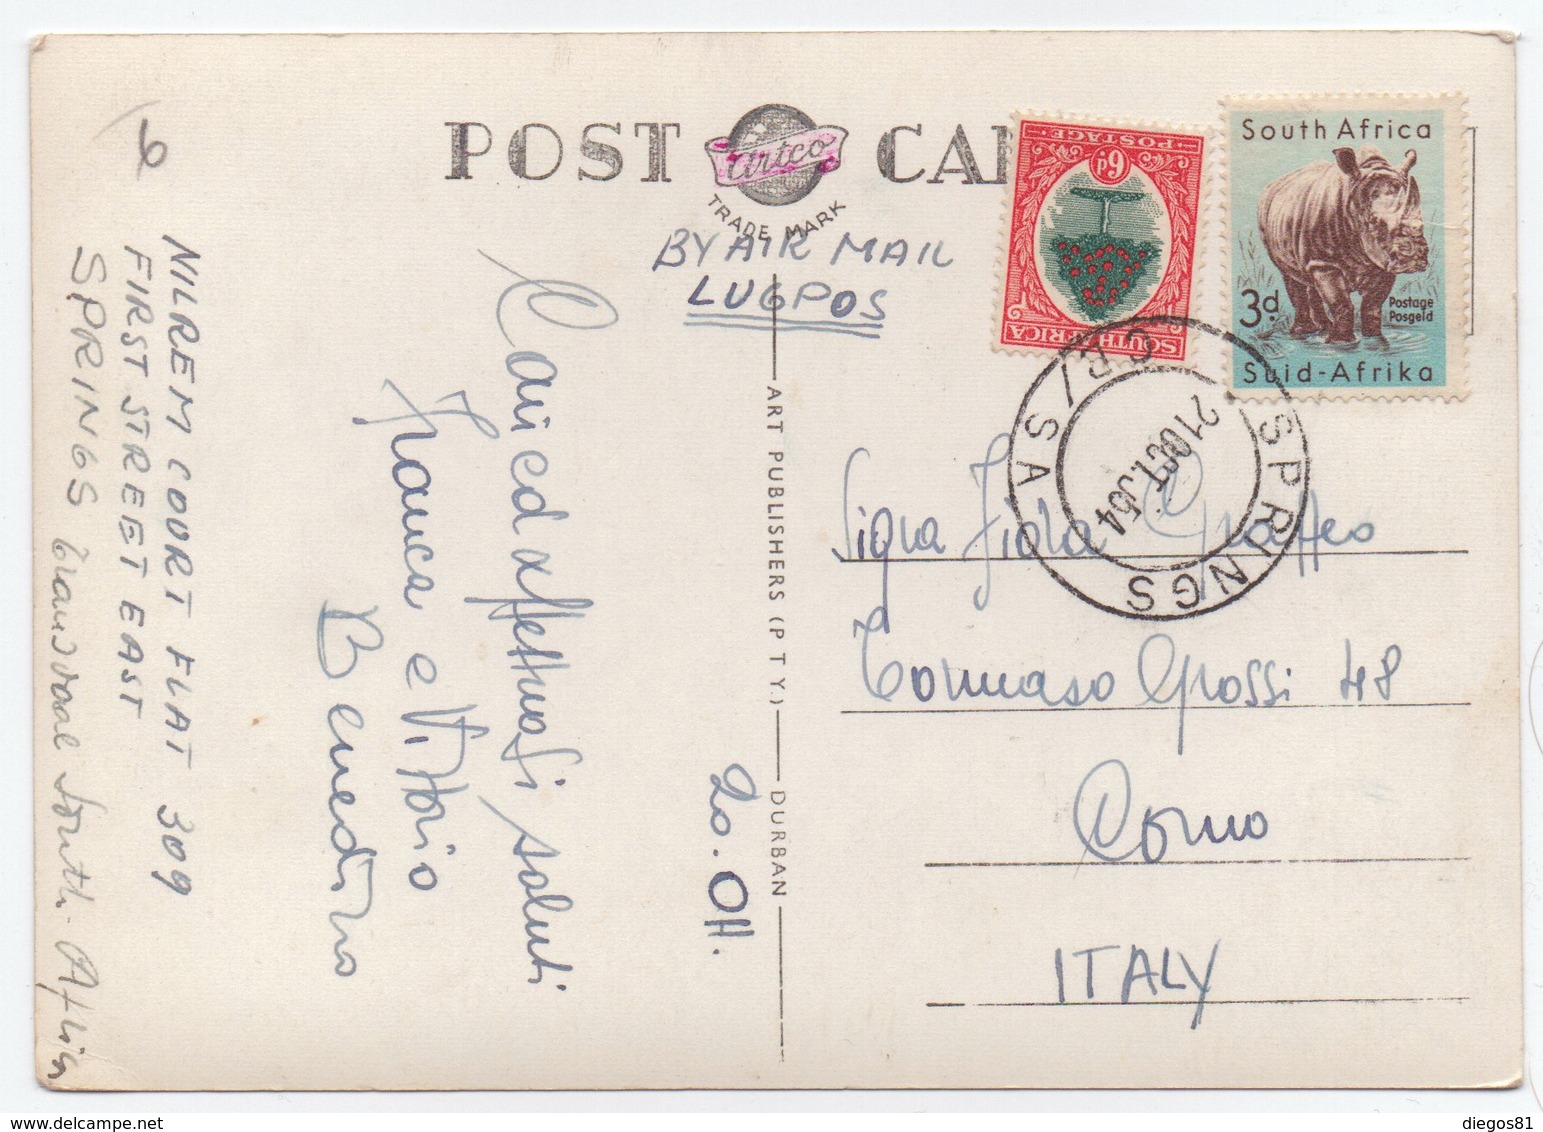 Springs - Post Office - South Africa - 21.10.1954 - South Africa